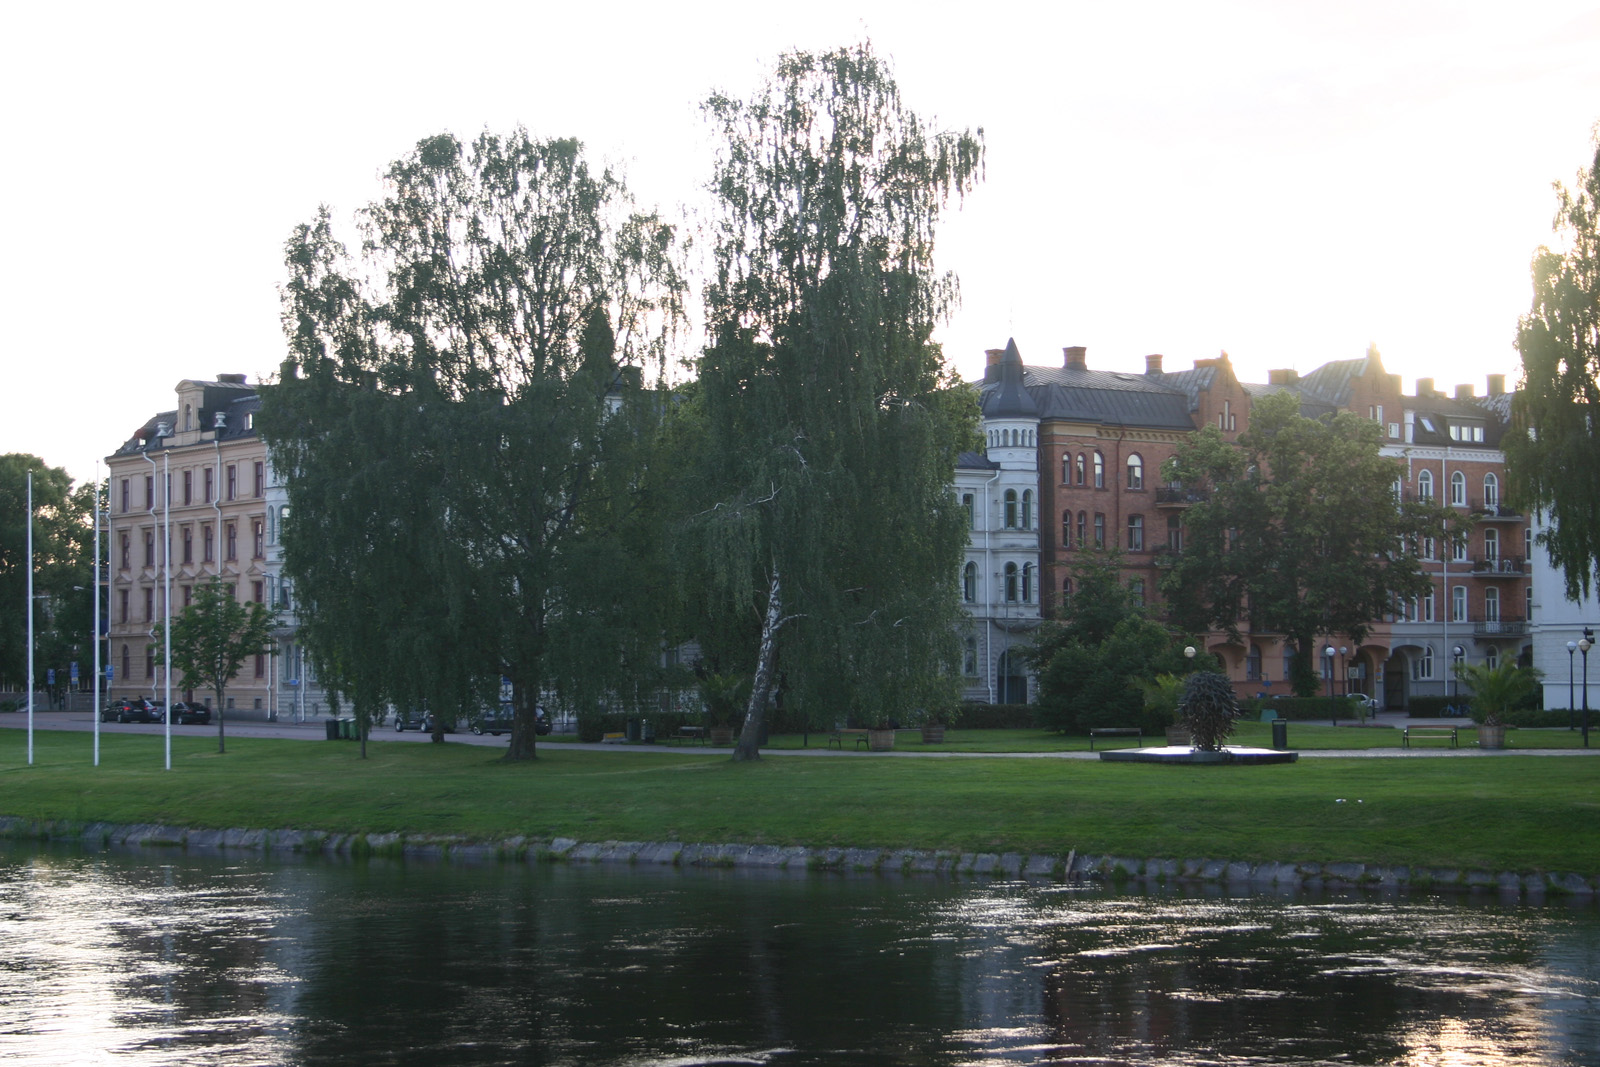 Old stately buildings along a green riverside